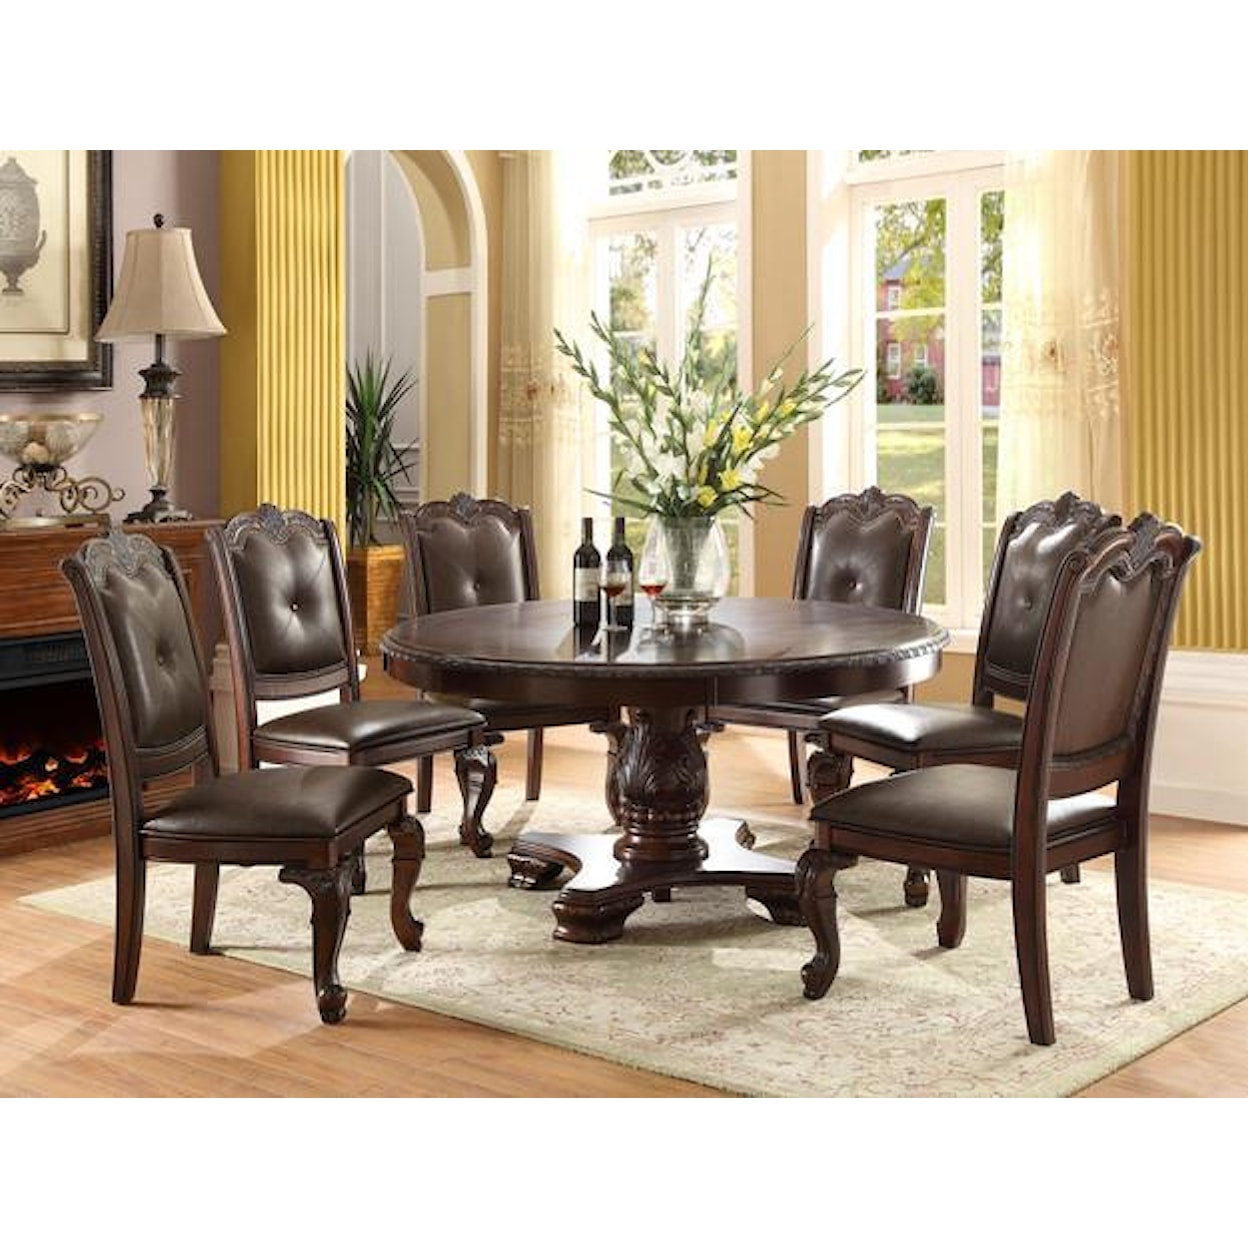 Crown Mark Kiera Round Table with Six Chairs